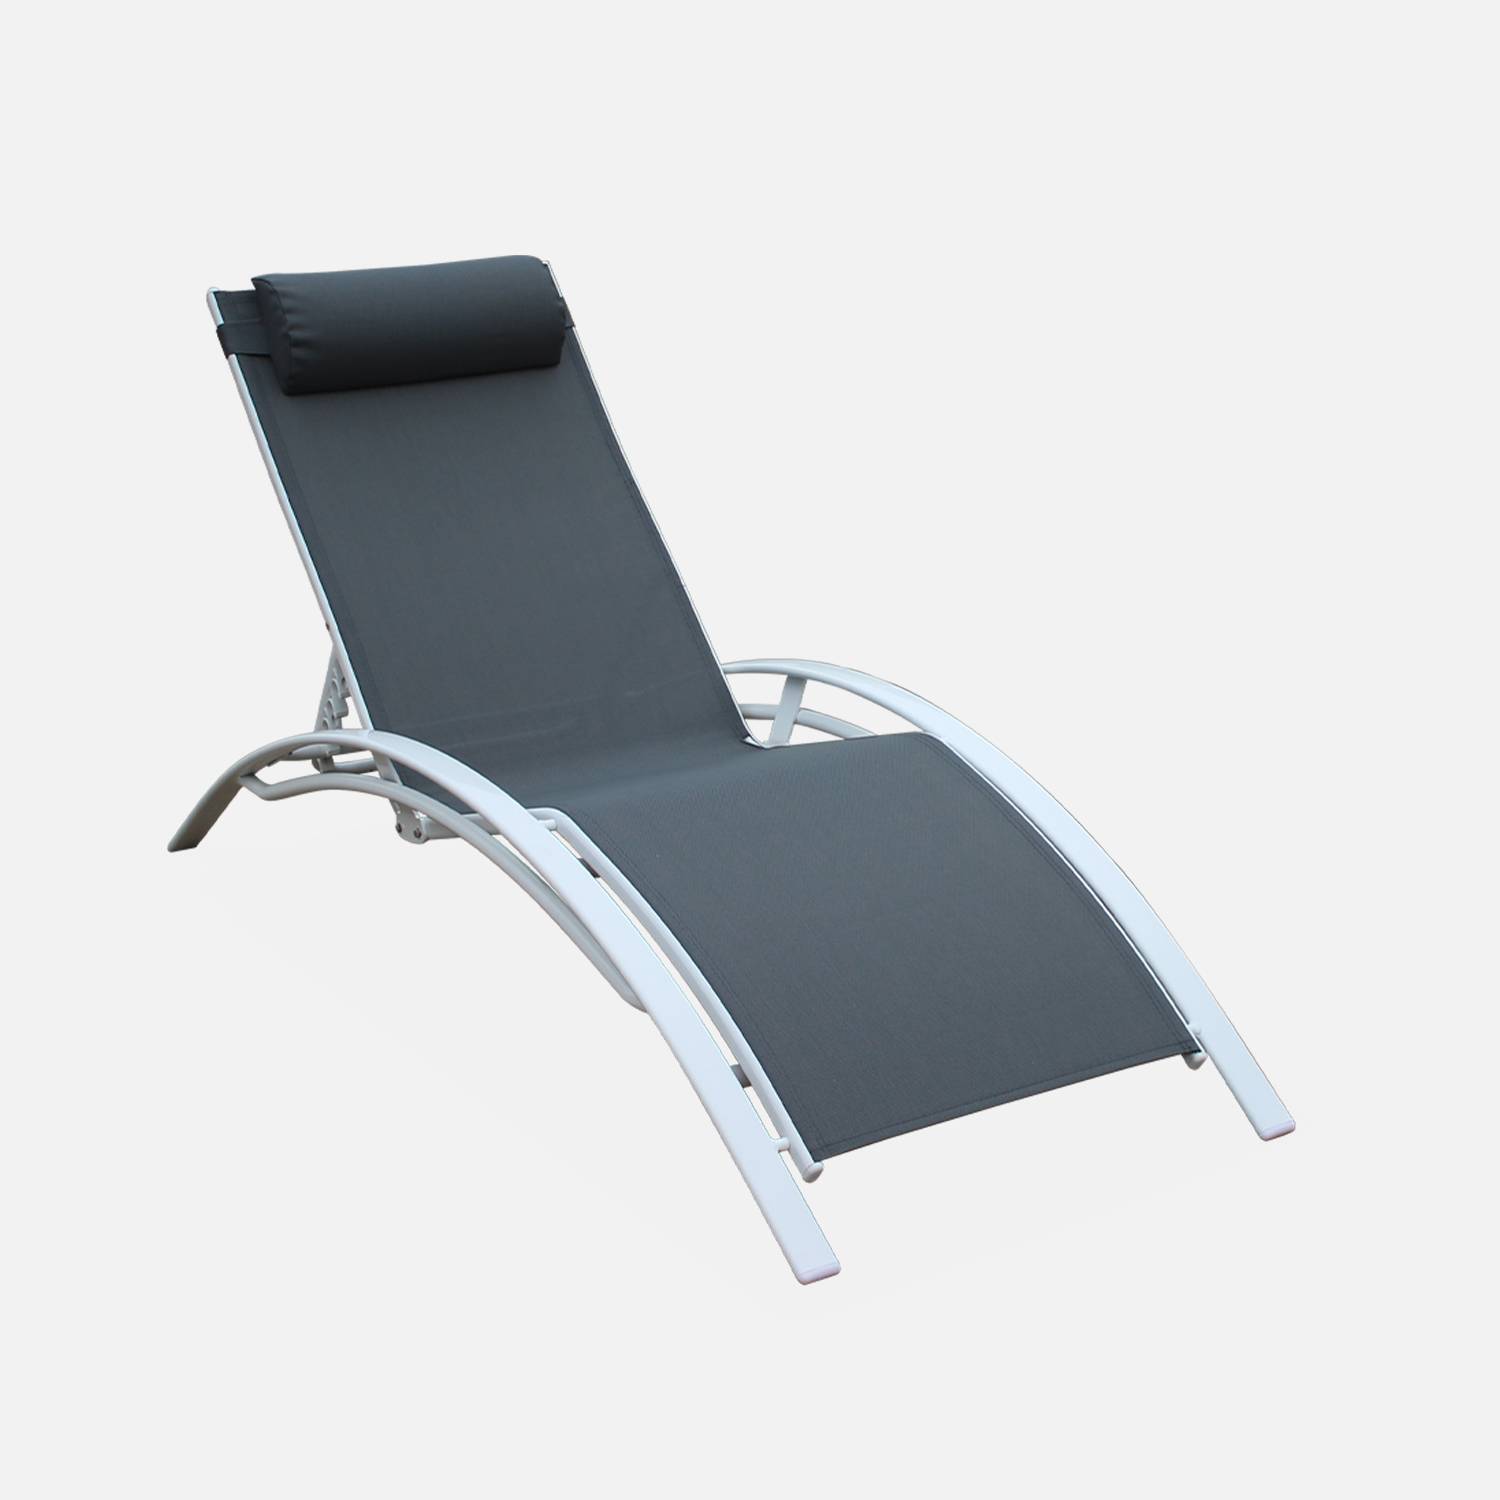 Pair of aluminium and textilene sun loungers, 4 reclining positions, headrest included, stackable - Louisa - White frame, Grey textilene,sweeek,Photo4